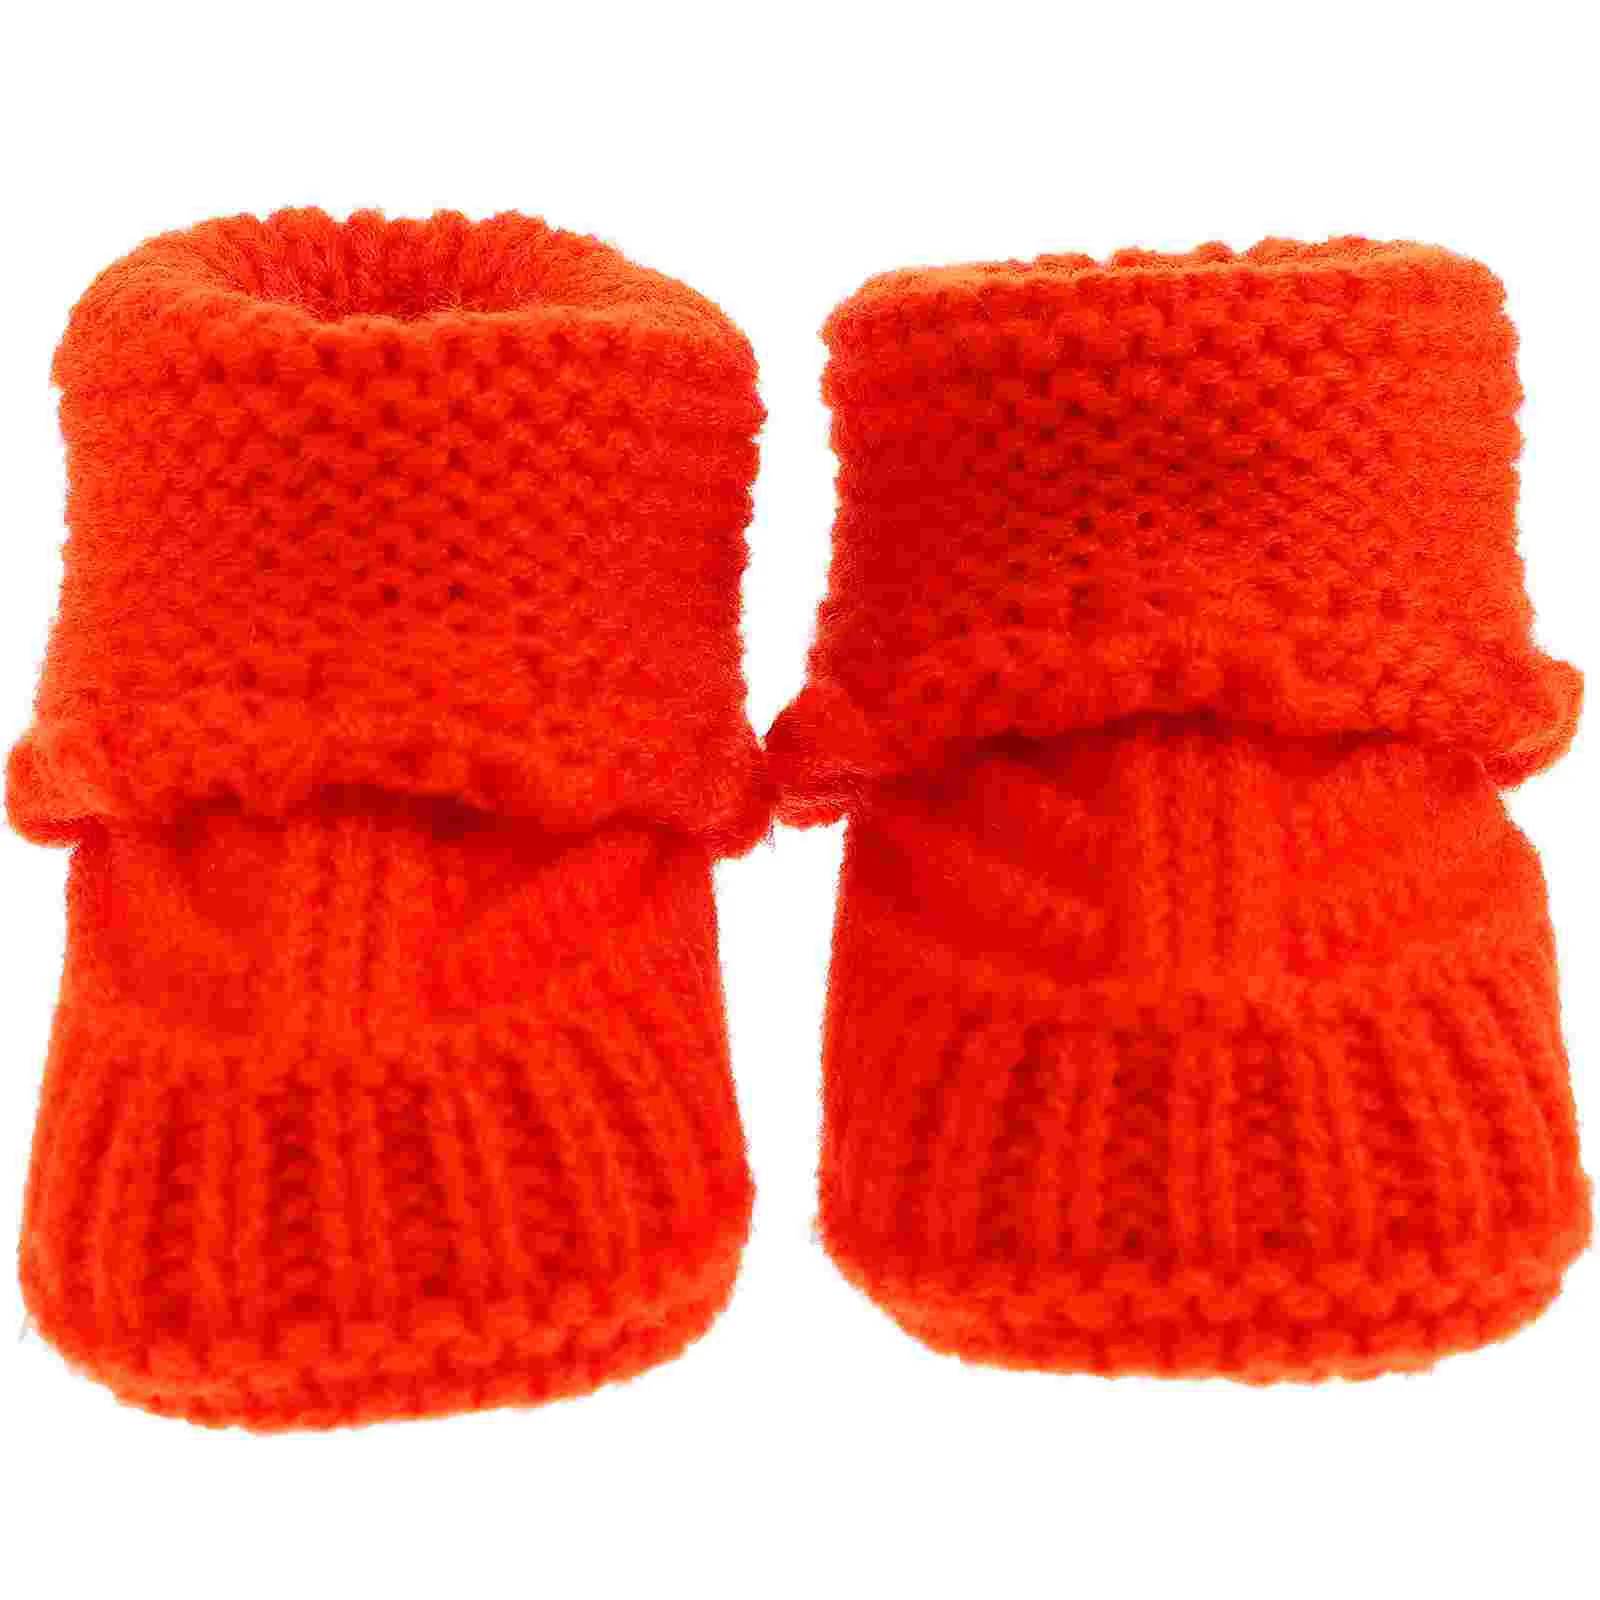 

Newborn Crochet Shoes Booties Handmade Knitted Thick Toddler Winter Footwear Baby Knitting For Infant